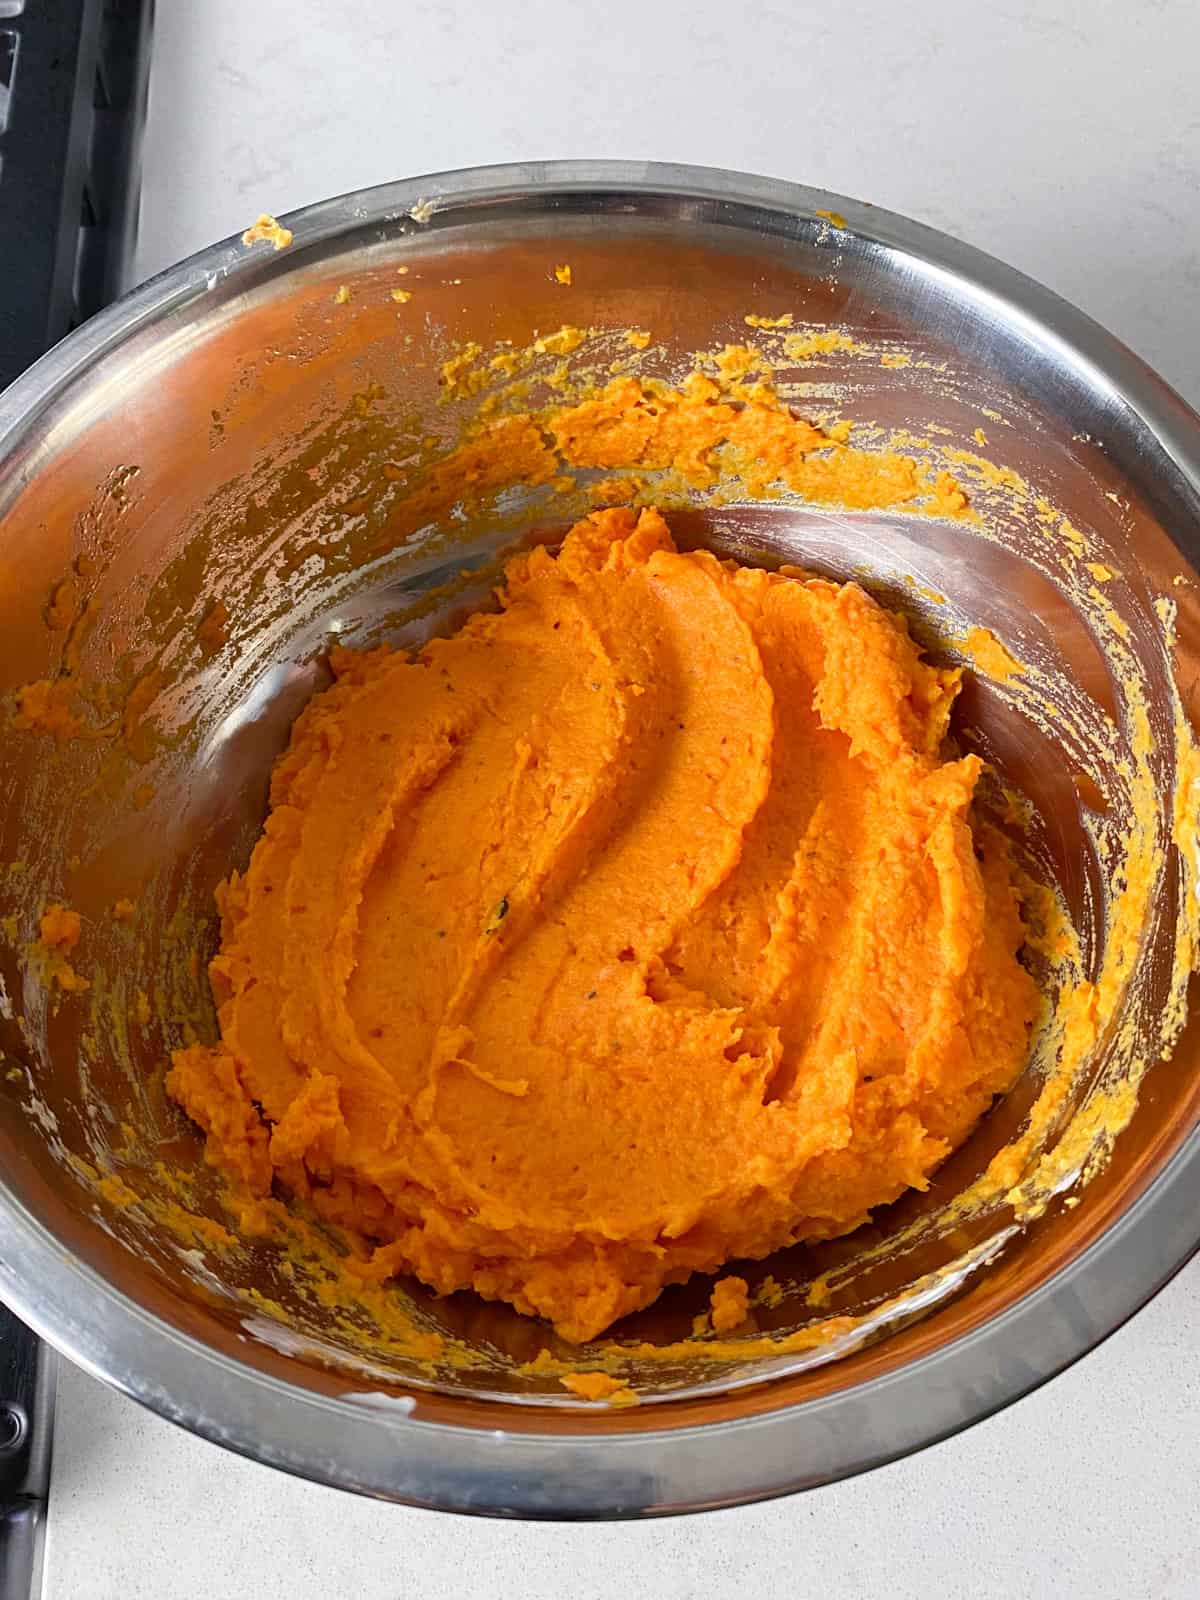 Give the mashed sweet potatoes a good mix until creamy.